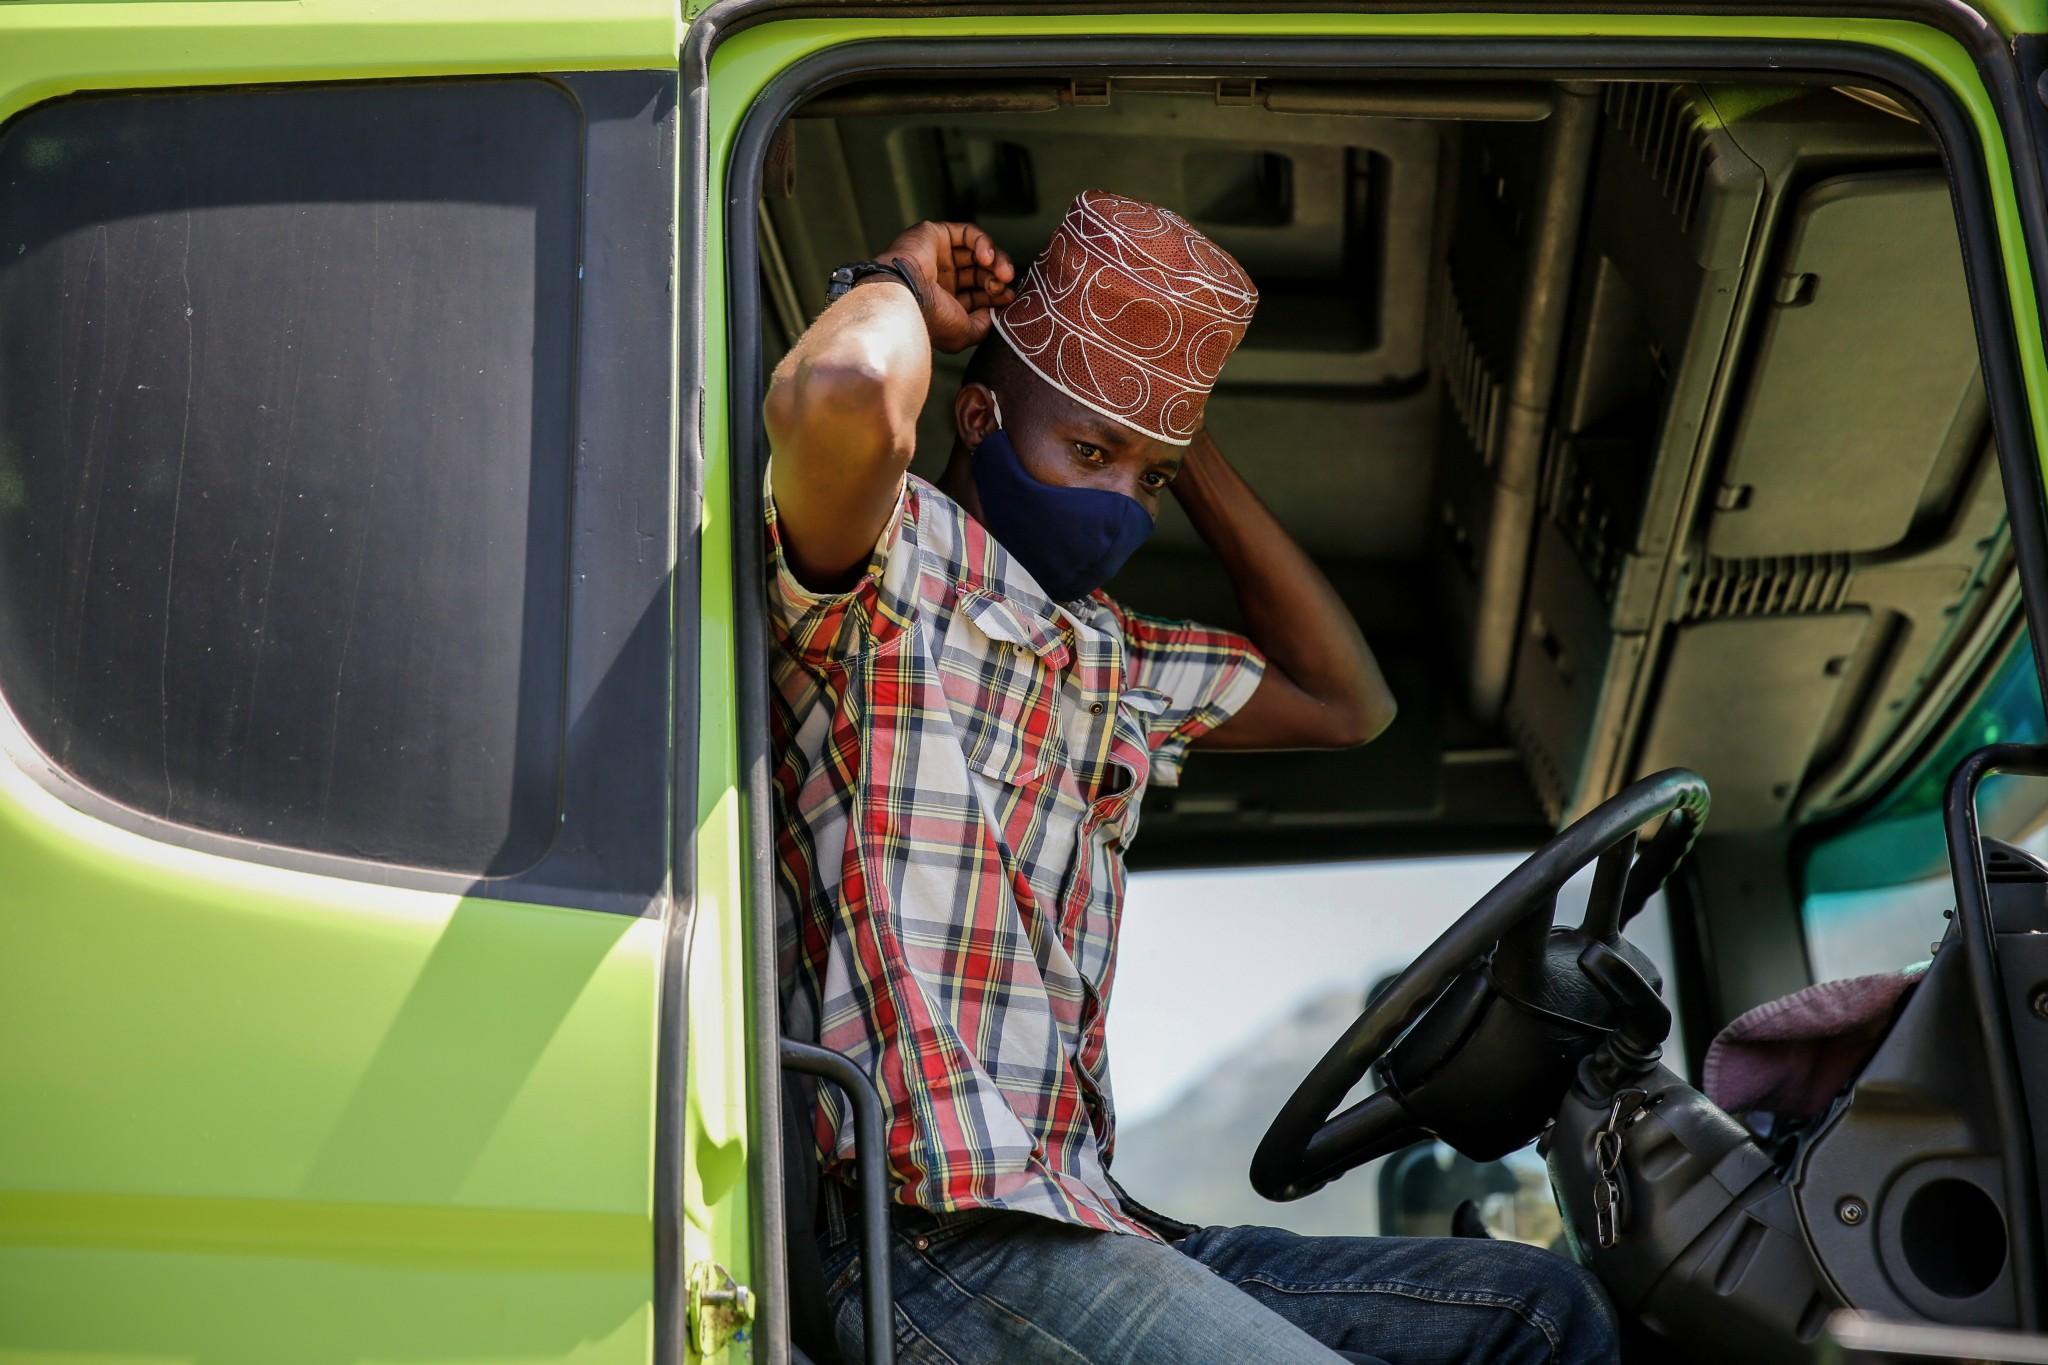 When I drive through towns they shout at me': Africa's essential truckers  say they face constant coronavirus stigma, The Independent